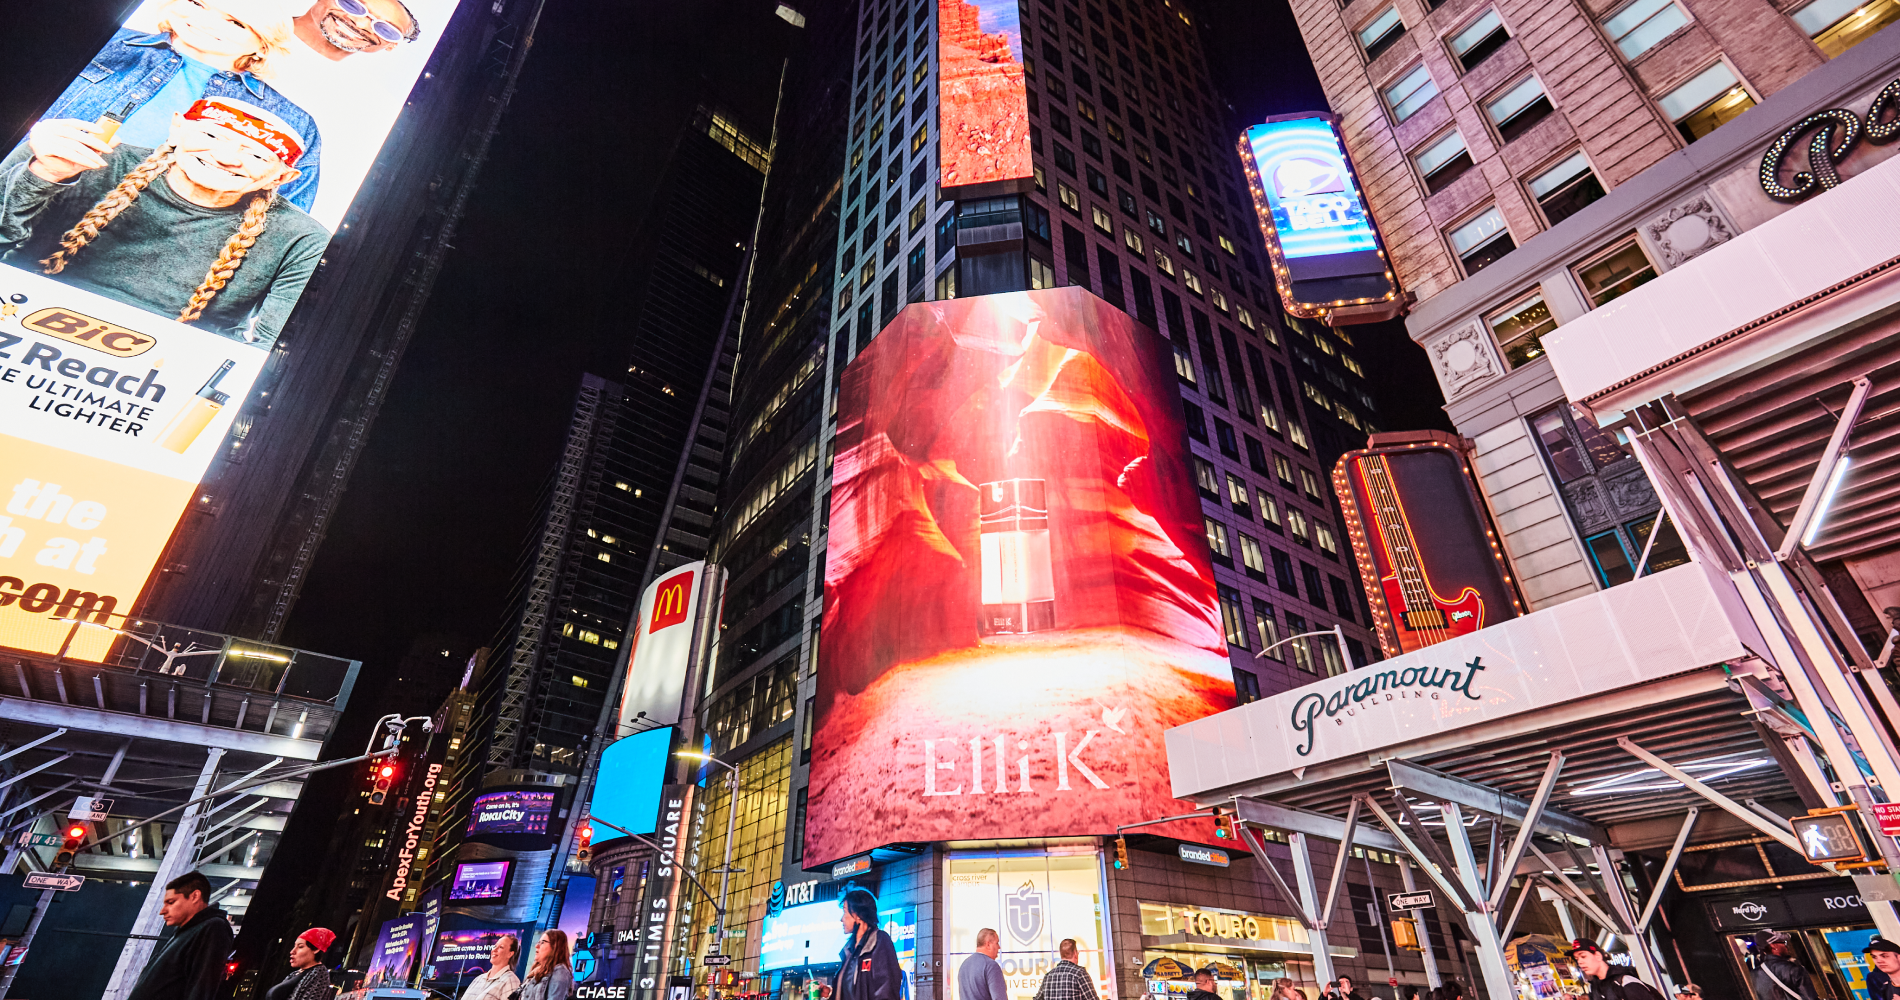 Elli K has officially fired its first flare at Times Square in New York.